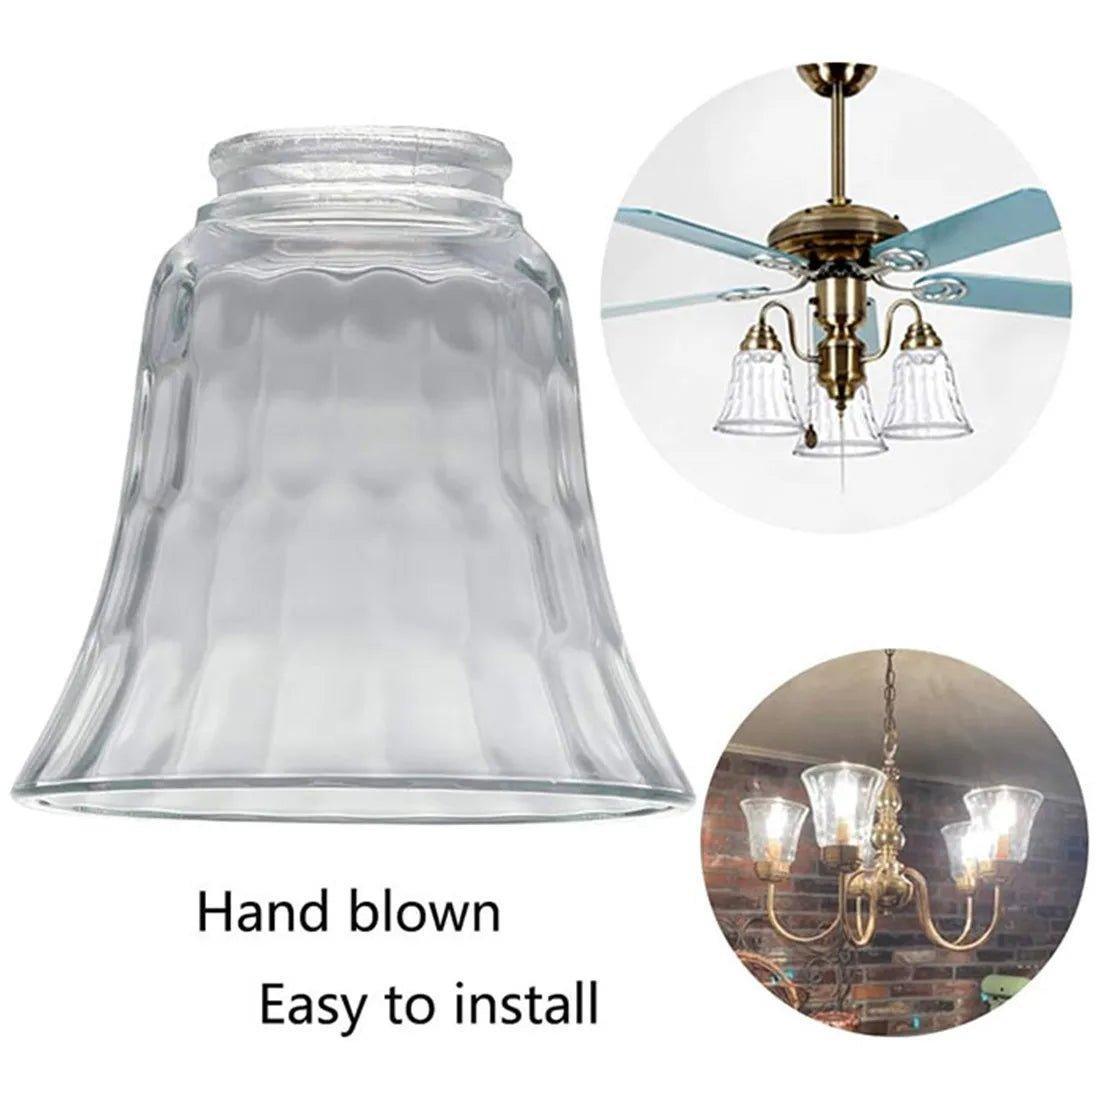 Screw Fixed Clear Hammered Style Bell Glass Shade Replacement for Ceiling Fan Light Covers Decorative Hammered Finish Accessory - Specialty Shades